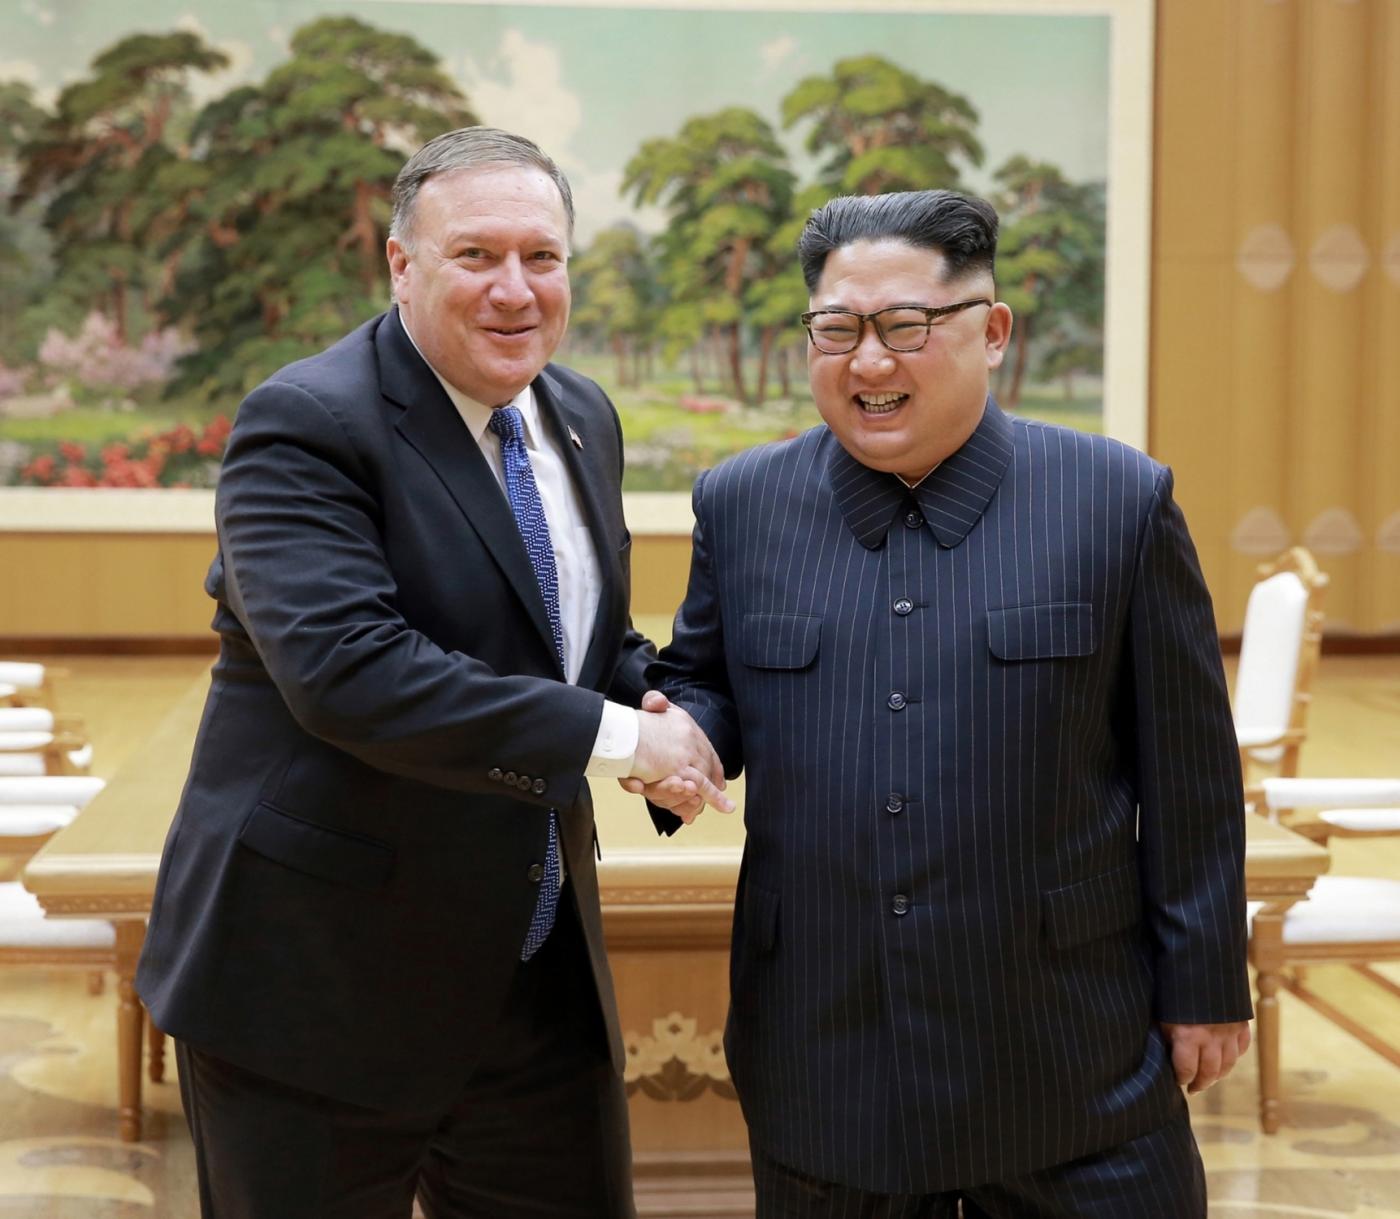 PYONGYANG, May 10, 2018 (Xinhua) -- Photo provided by the Korean Central News Agency (KCNA) on May 10, 2018 shows Kim Jong Un (R), top leader of the Democratic People's Republic of Korea (DPRK), shaking hands with visiting U.S. Secretary of State Mike Pompeo on May 9, 2018. Kim Jong Un expressed confidence that his upcoming summit meeting with U.S. President Donald Trump would be a historic one. (Xinhua/KCNA/IANS) by . 